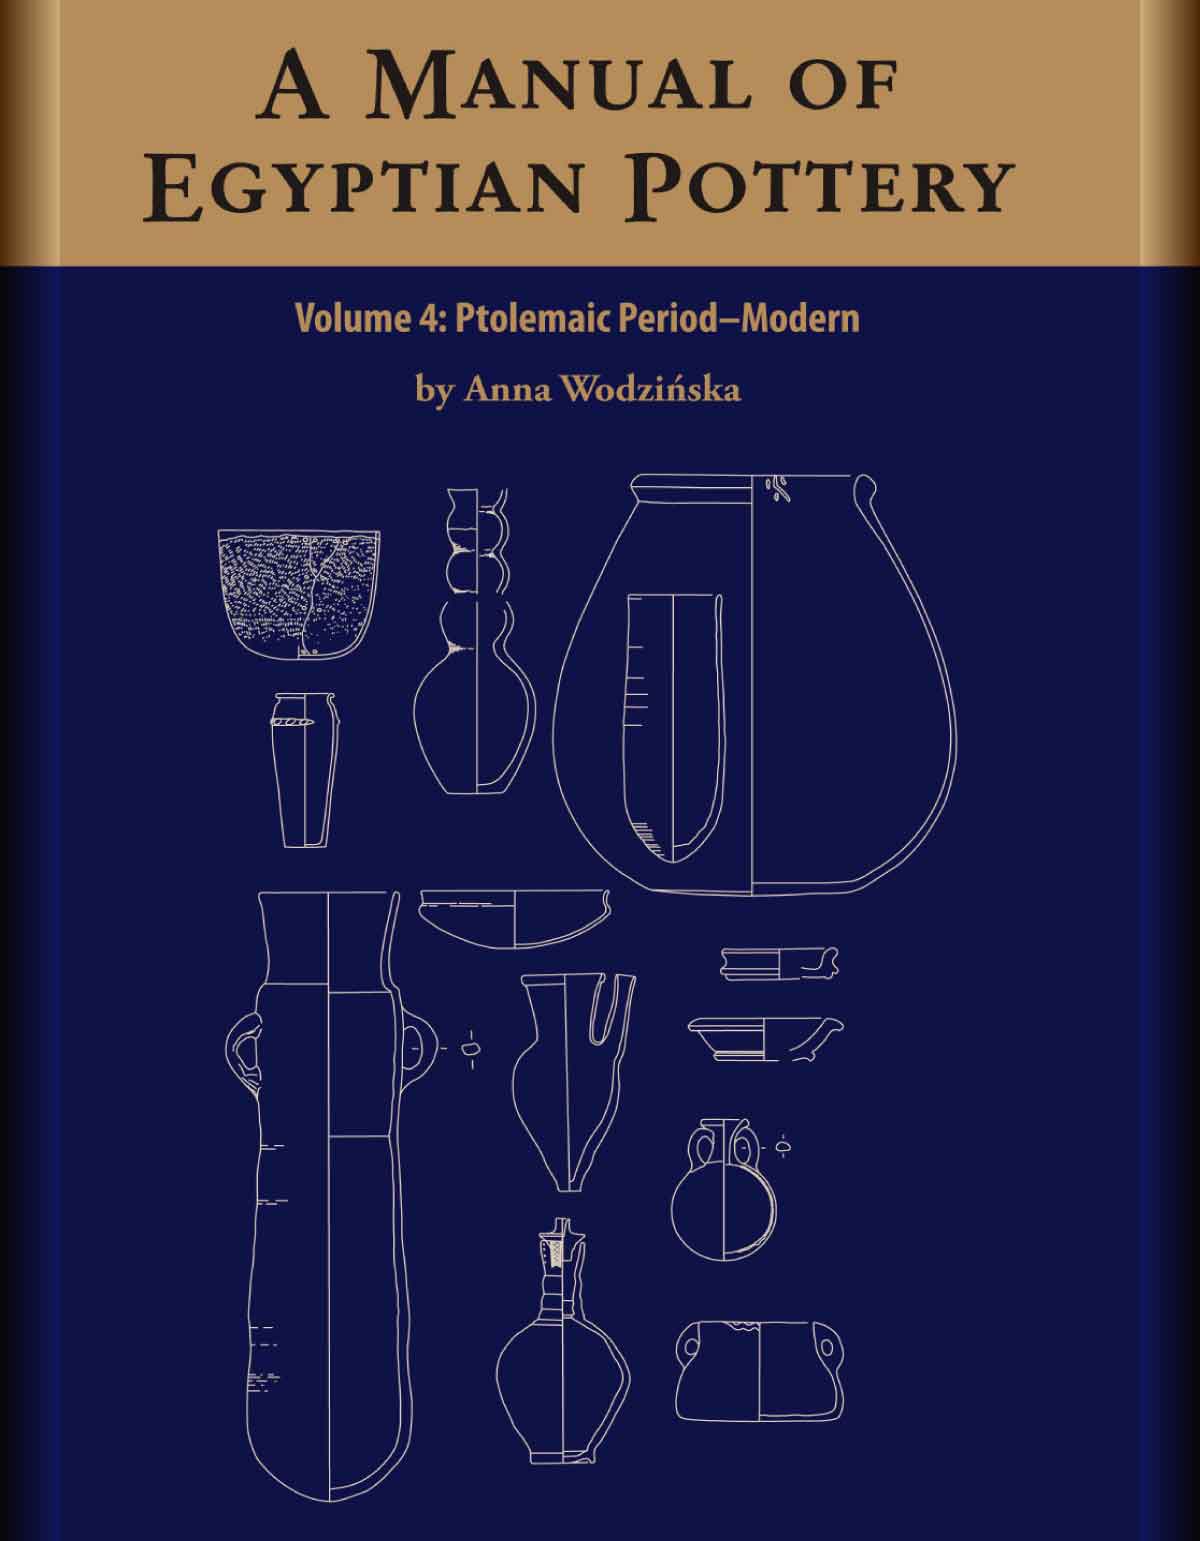 A-Manual-of-Egyptian-Pottery-vol-4-cover